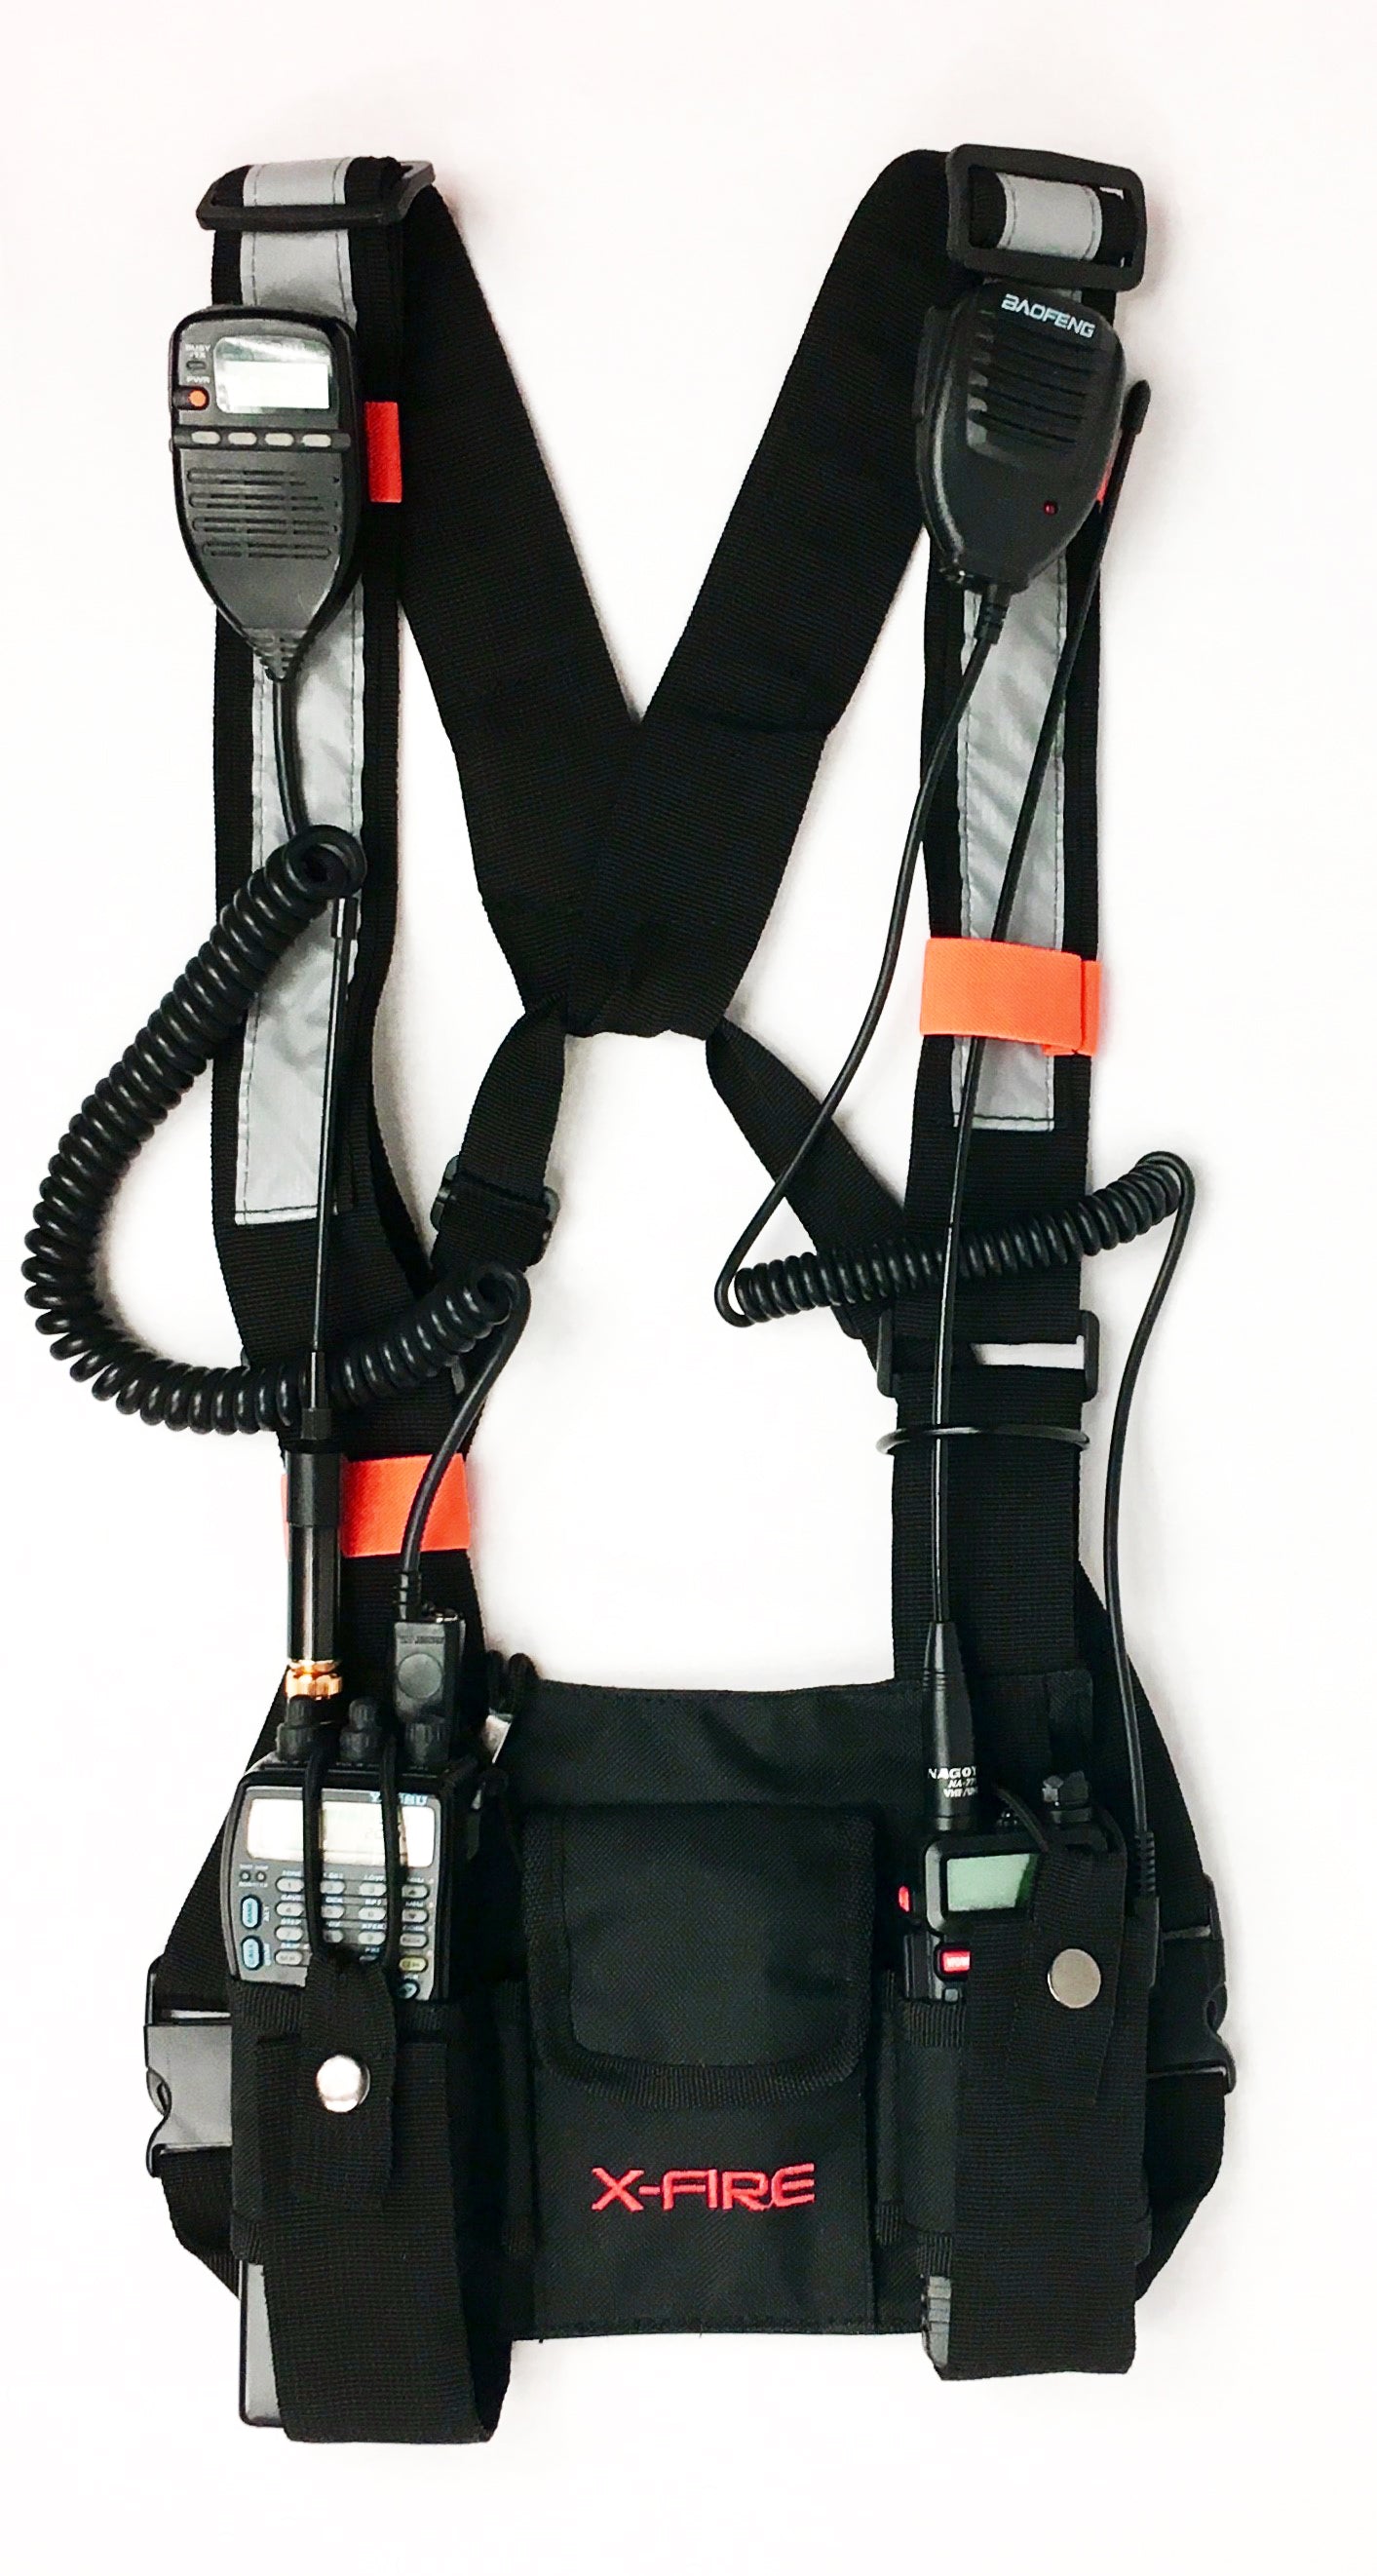 X-FIRE® Dual Portable Radio Chest Rig Harness for Two-Way Radios w/ 3m Reflective